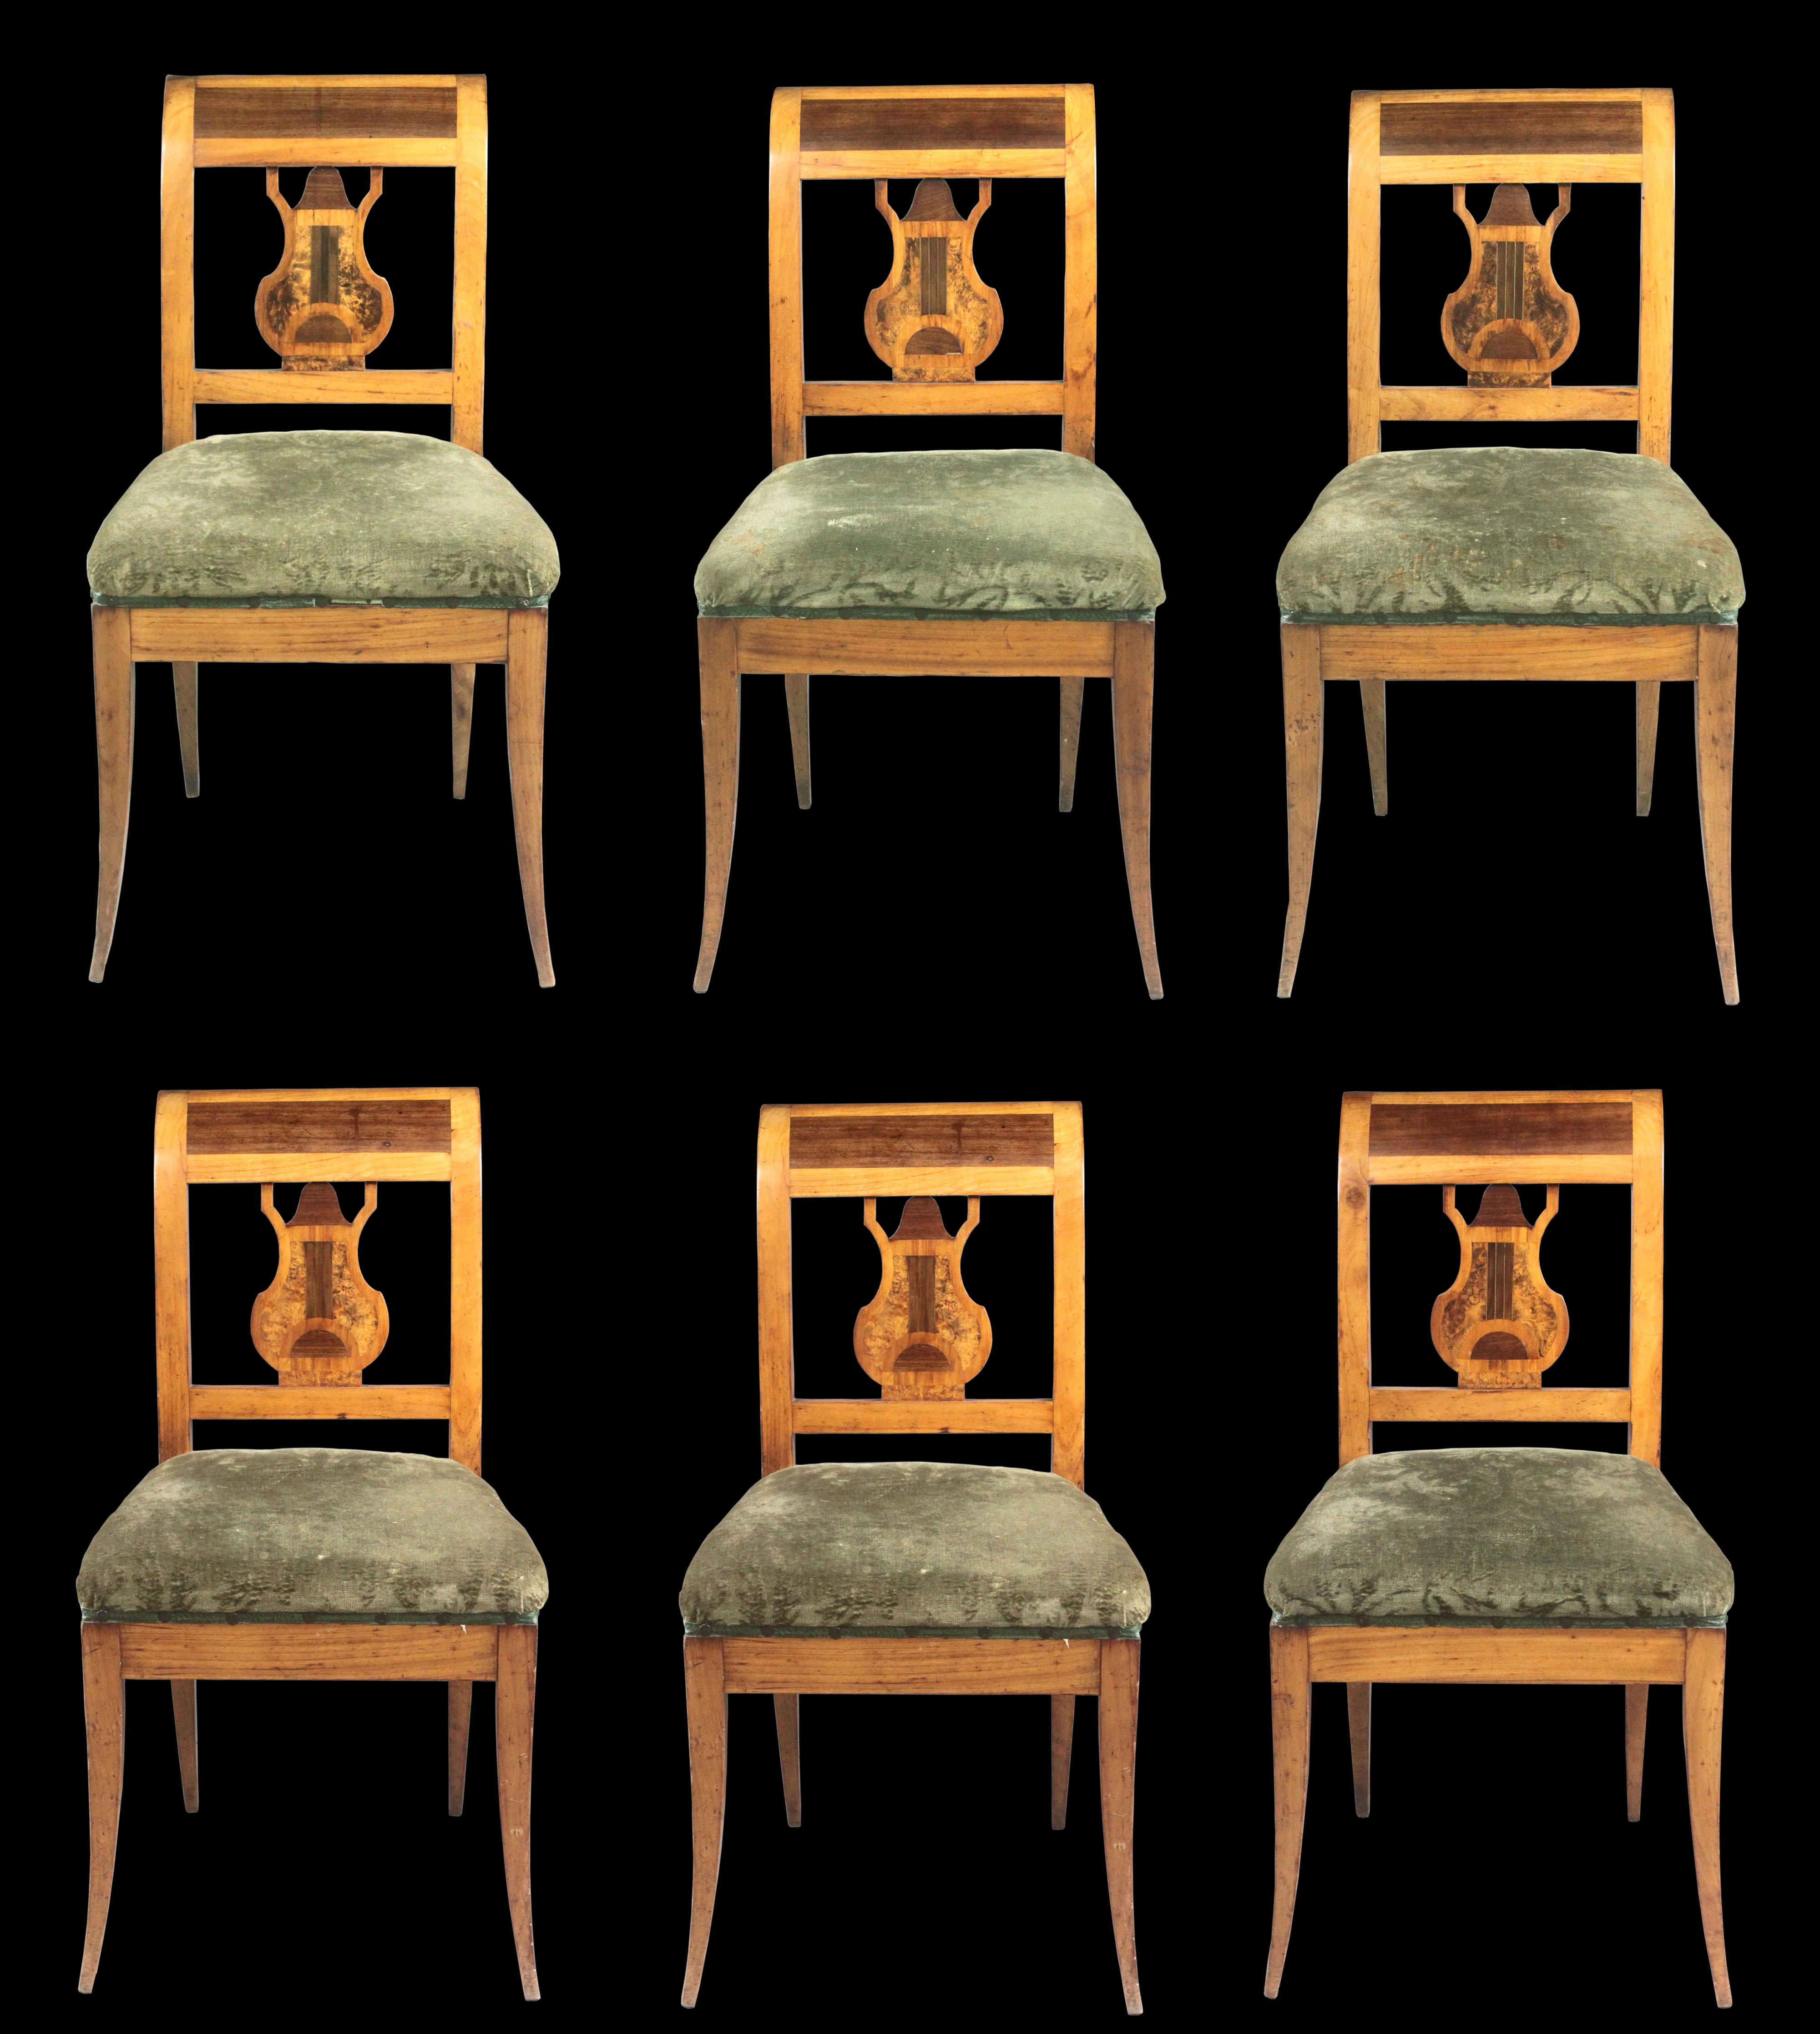 Set of Six Biedermeier Chairs
An attractive set of six Biedermeier chairs in fruitwood with beautifully made lyre backs in burr ash and cherrywood veneers.
The lyre backs motif originated in classical Greece.
They were probably made in Austria,